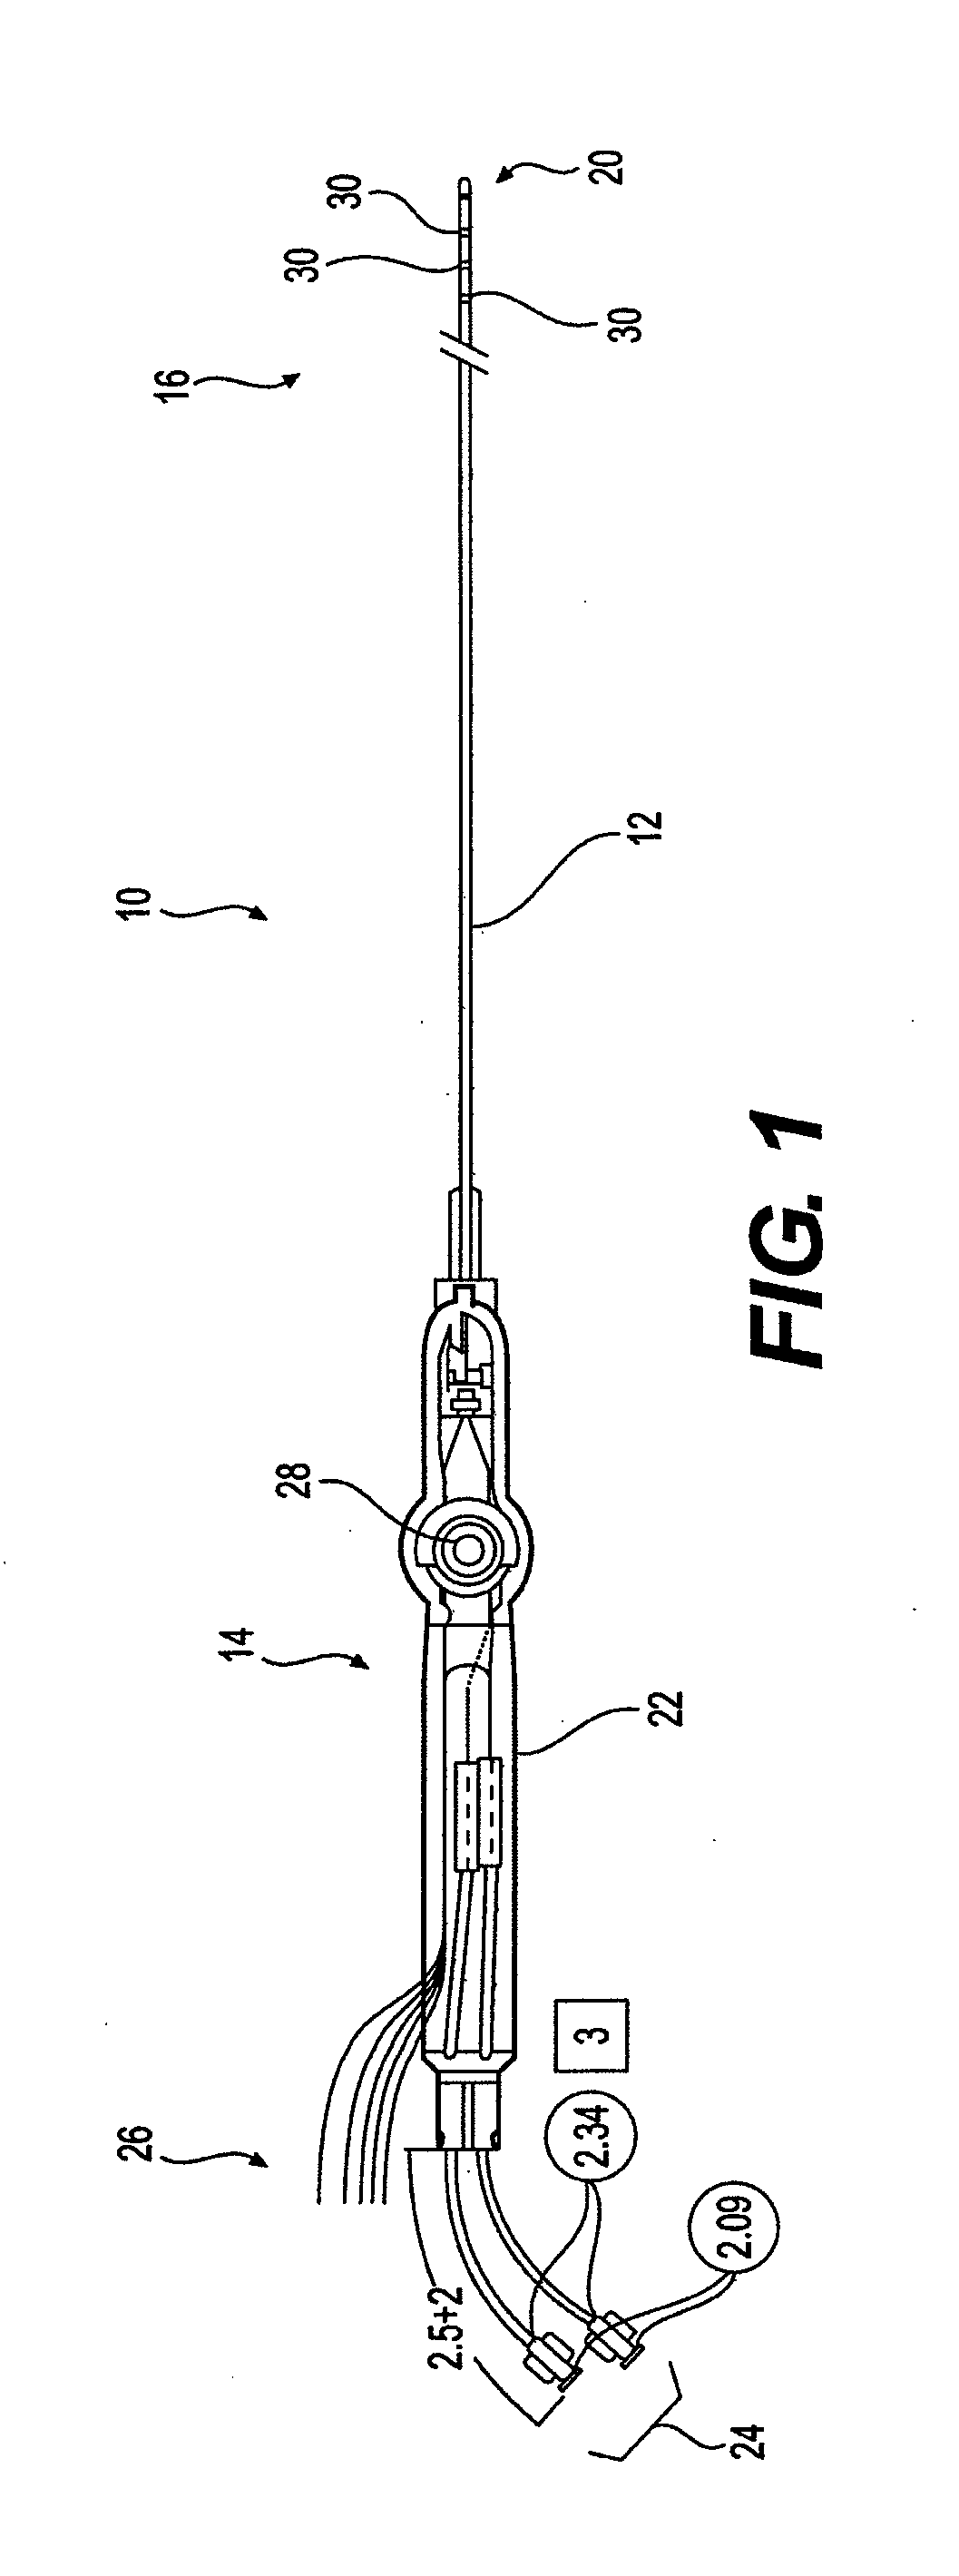 Cooled ablation catheter devices and methods of use